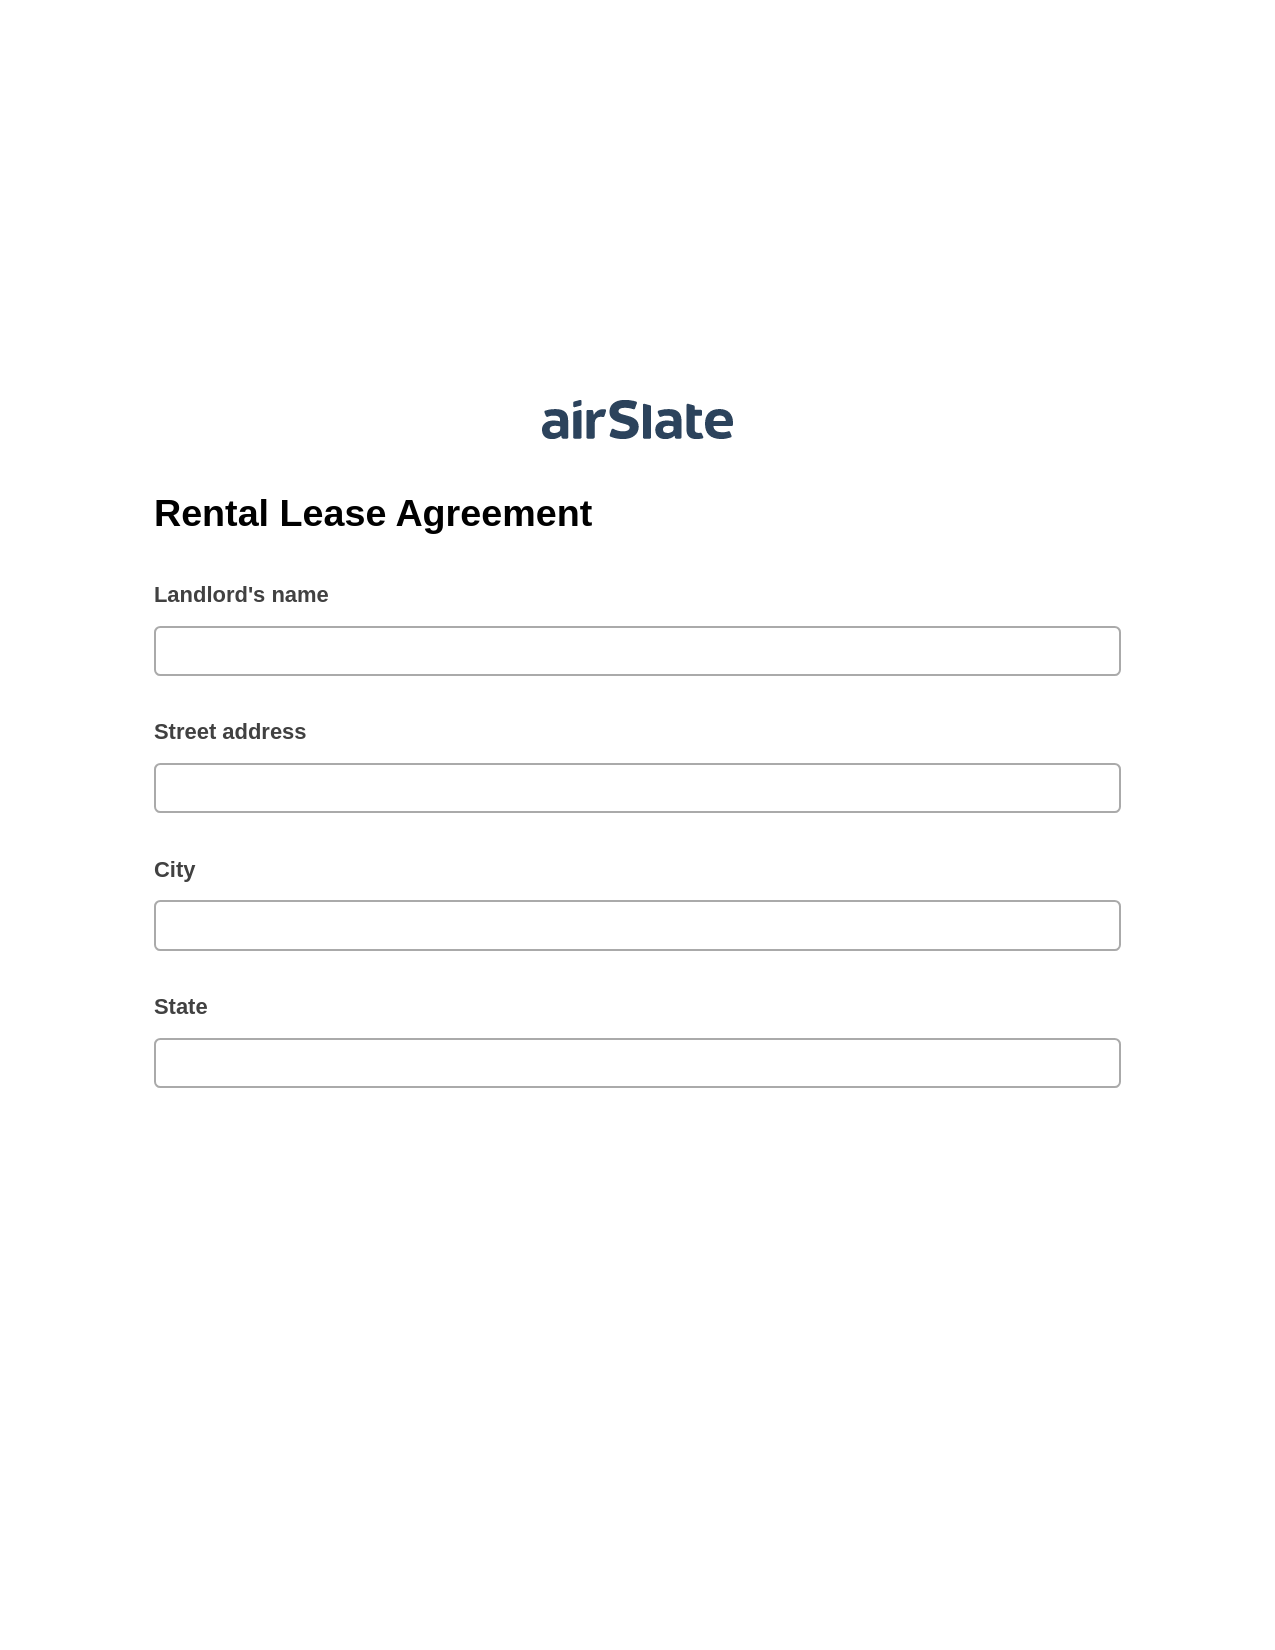 Rental Lease Agreement Pre-fill from MySQL Dropdown Options Bot, Jira Bot, Export to Excel 365 Bot